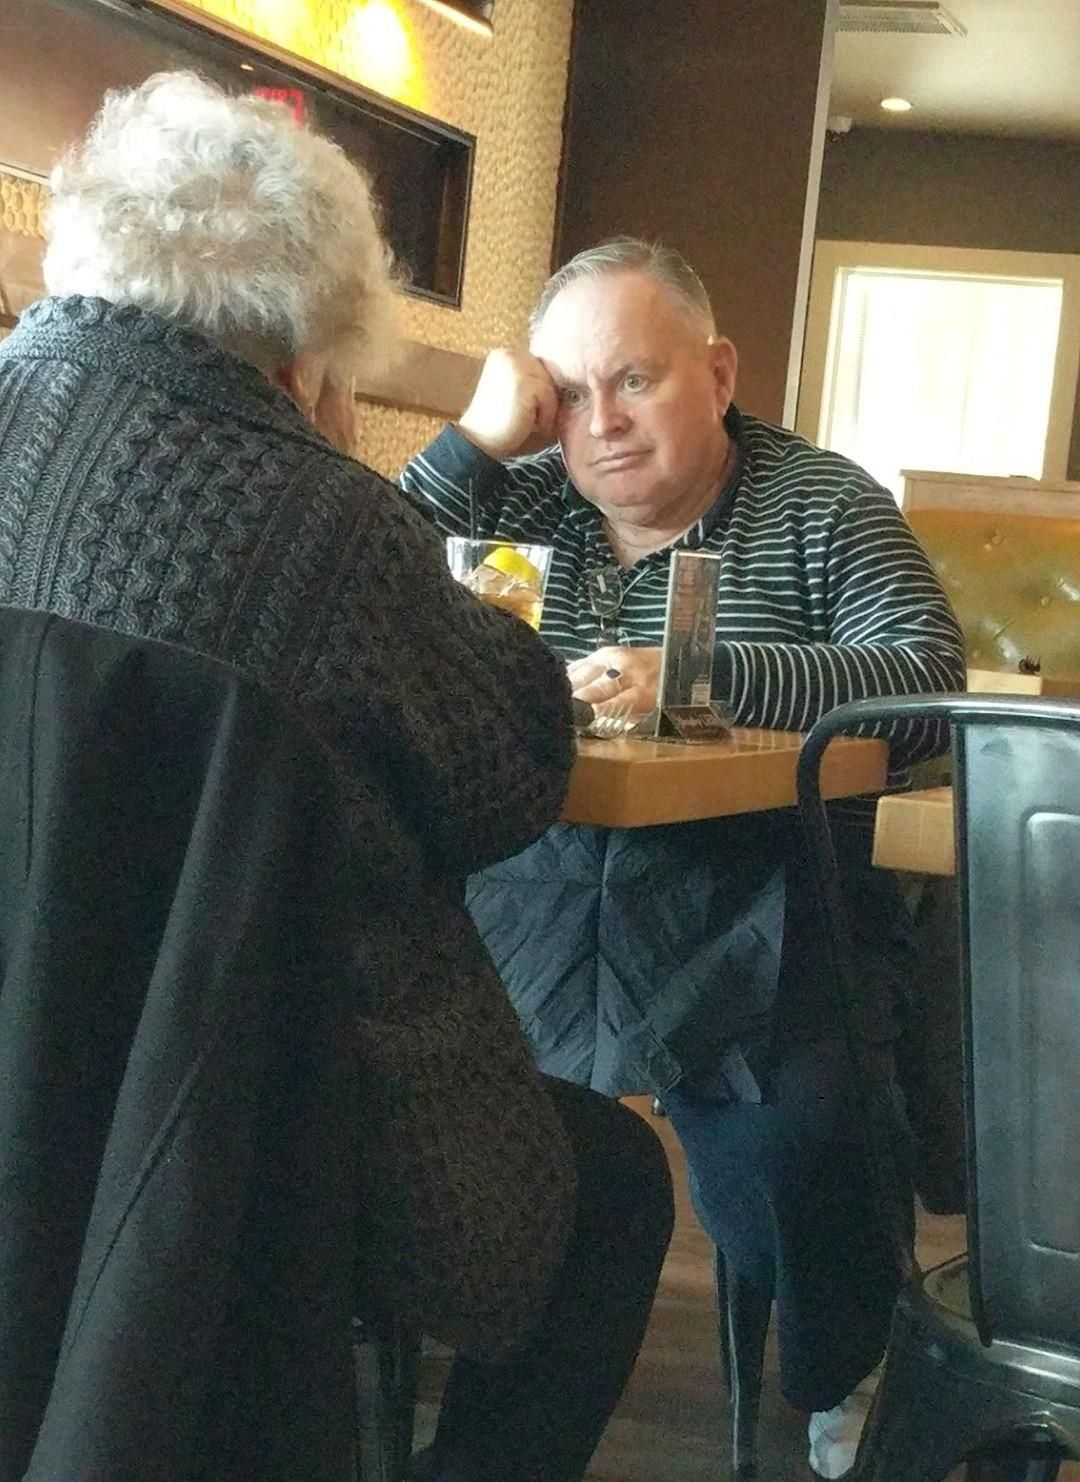 Spotted this couple while having lunch. She's talking but I guarantee he ain't listening.